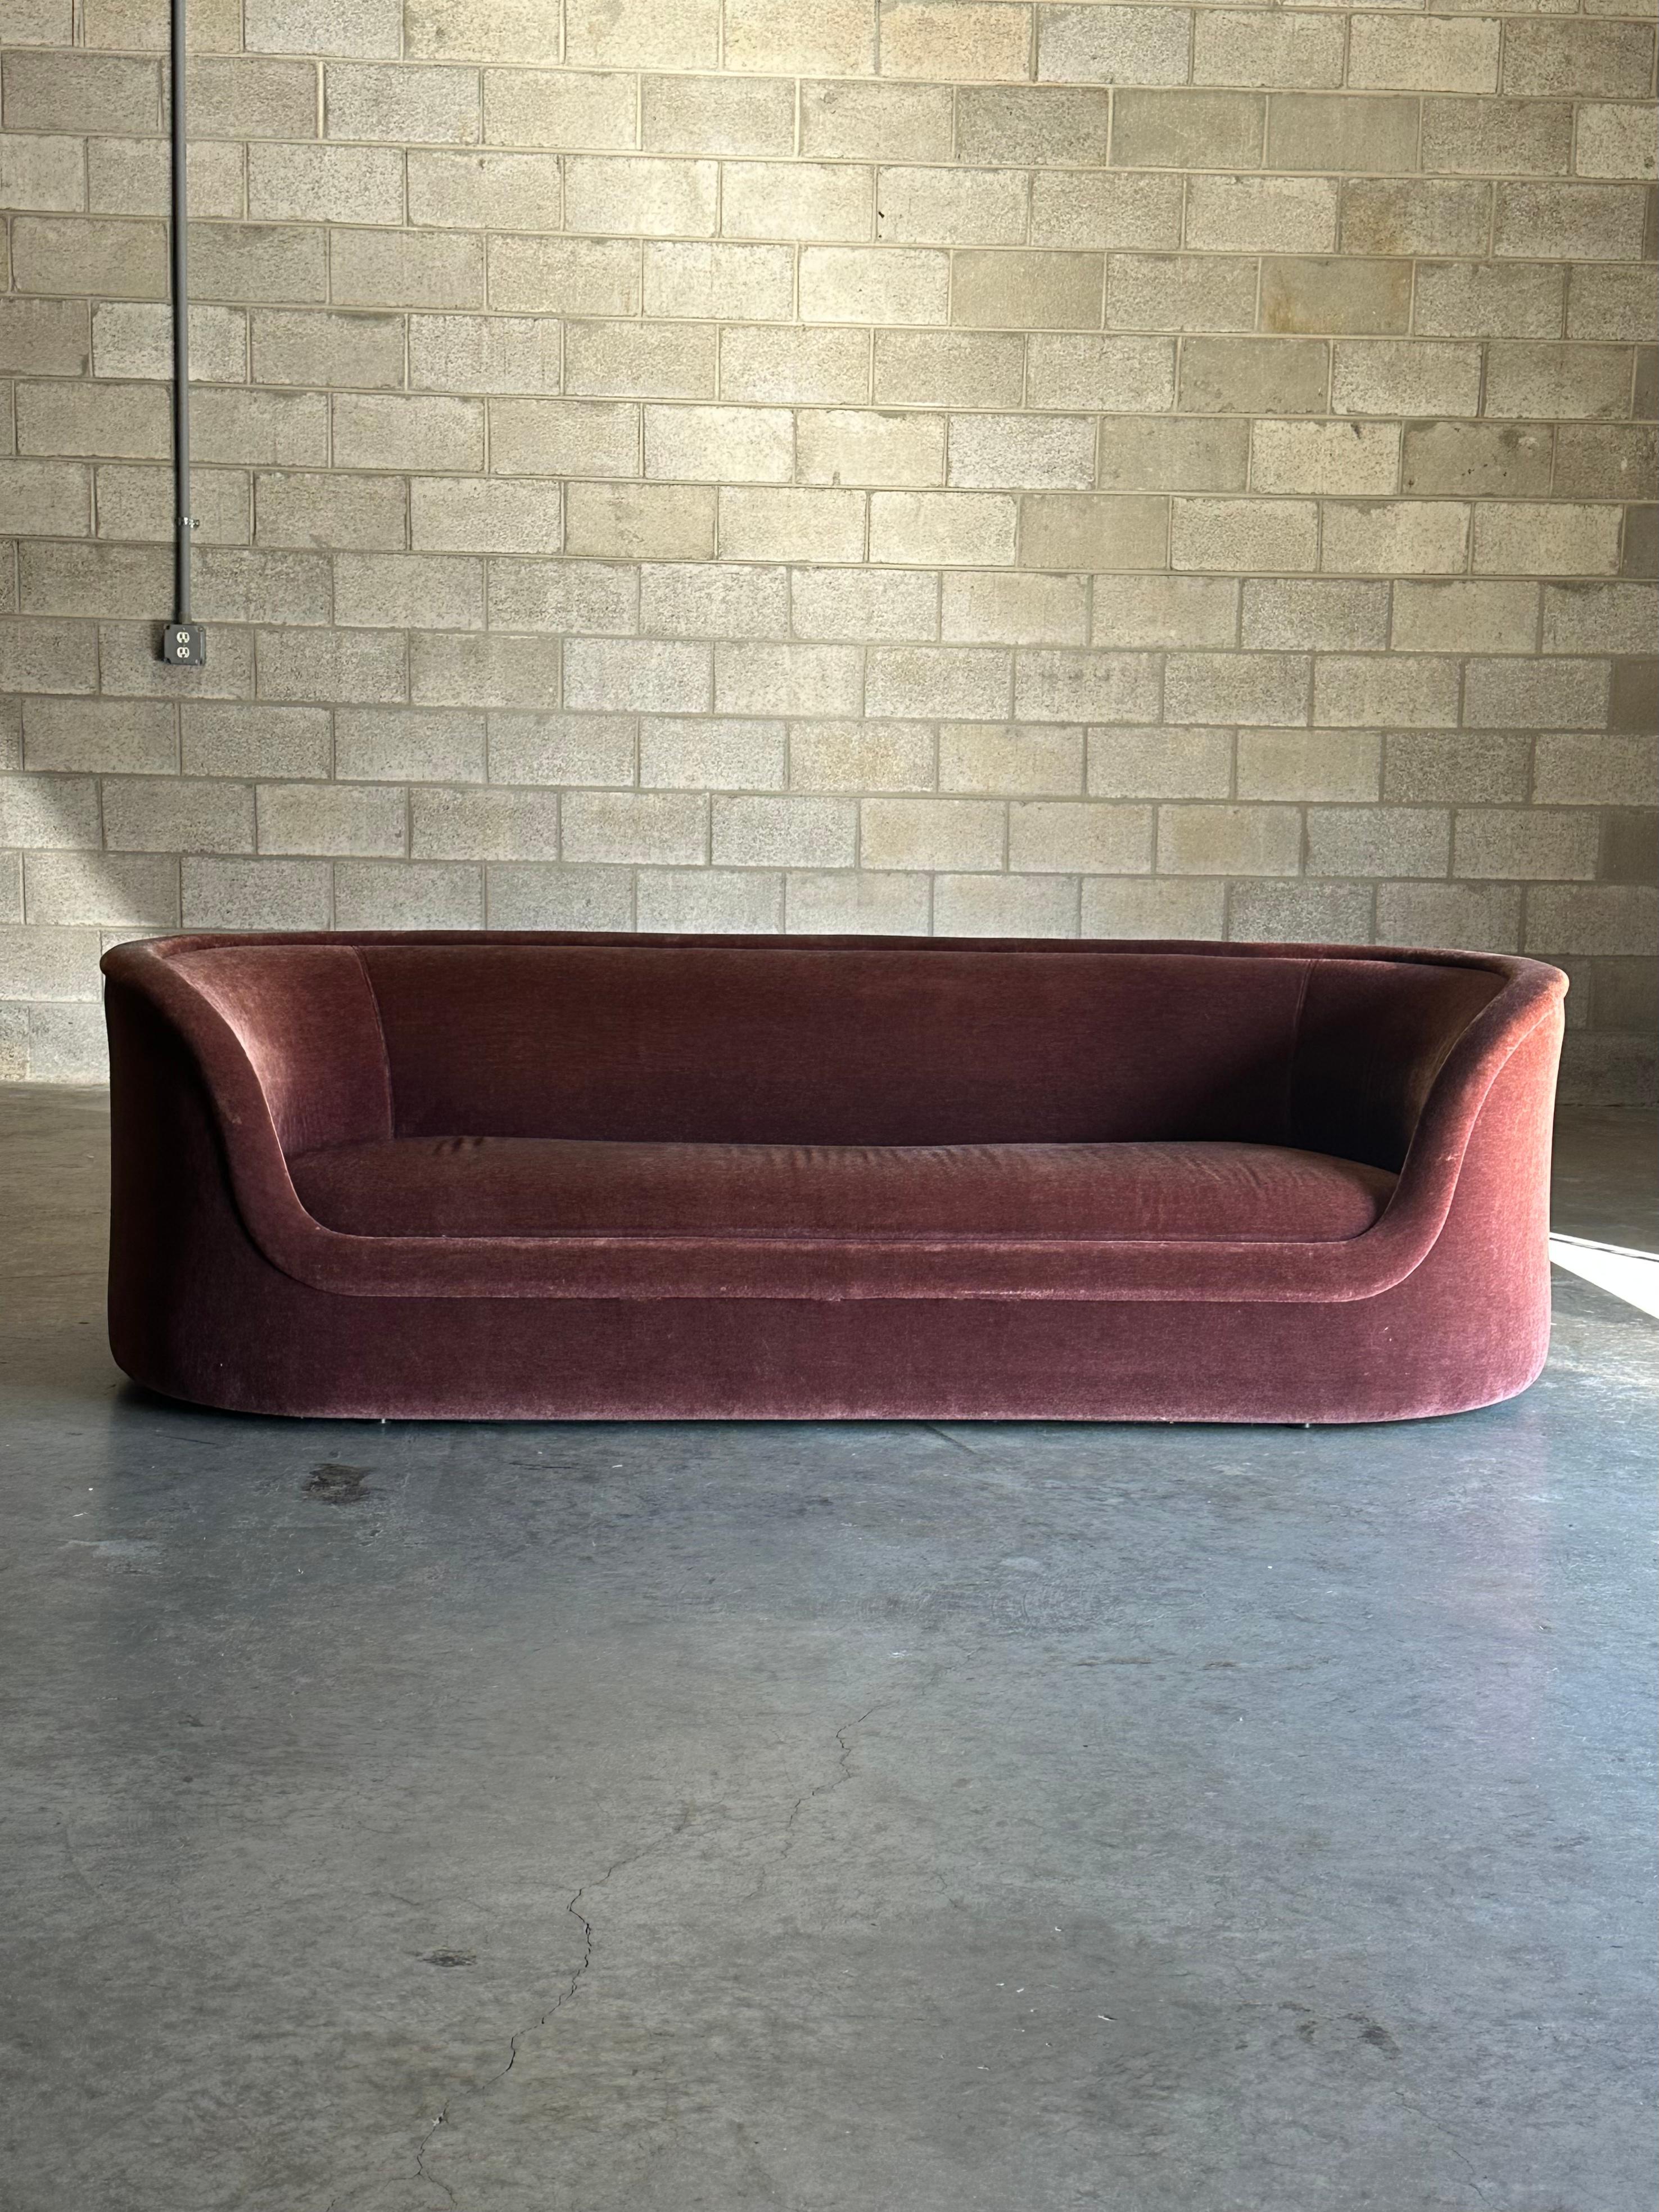 A rare Cartouche sofa by Ward Bennett for Brickel Associates. Sofa features a straight body accentuated by curved sides. Currently upholstered in what appears to be the original mohair. Very low profile yet surprisingly comfortable. 

85